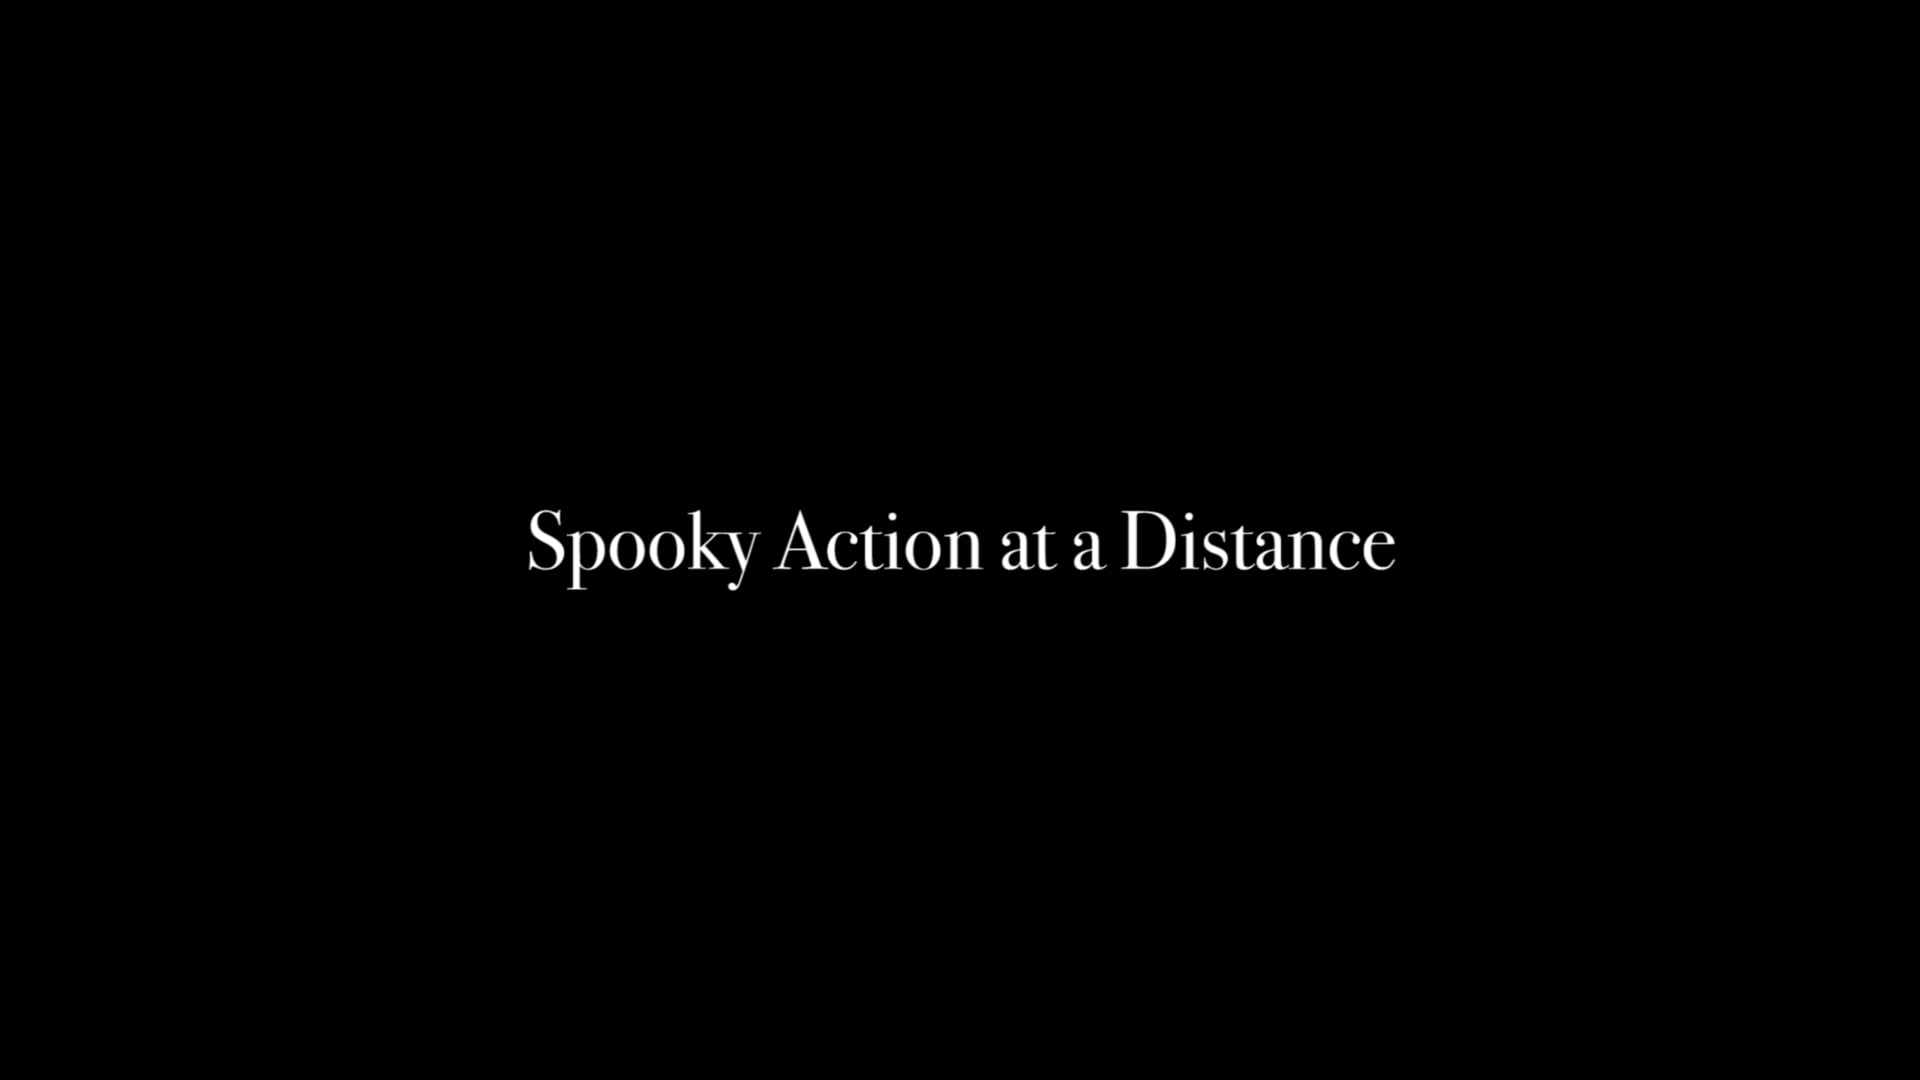 Spooky Action at a Distance